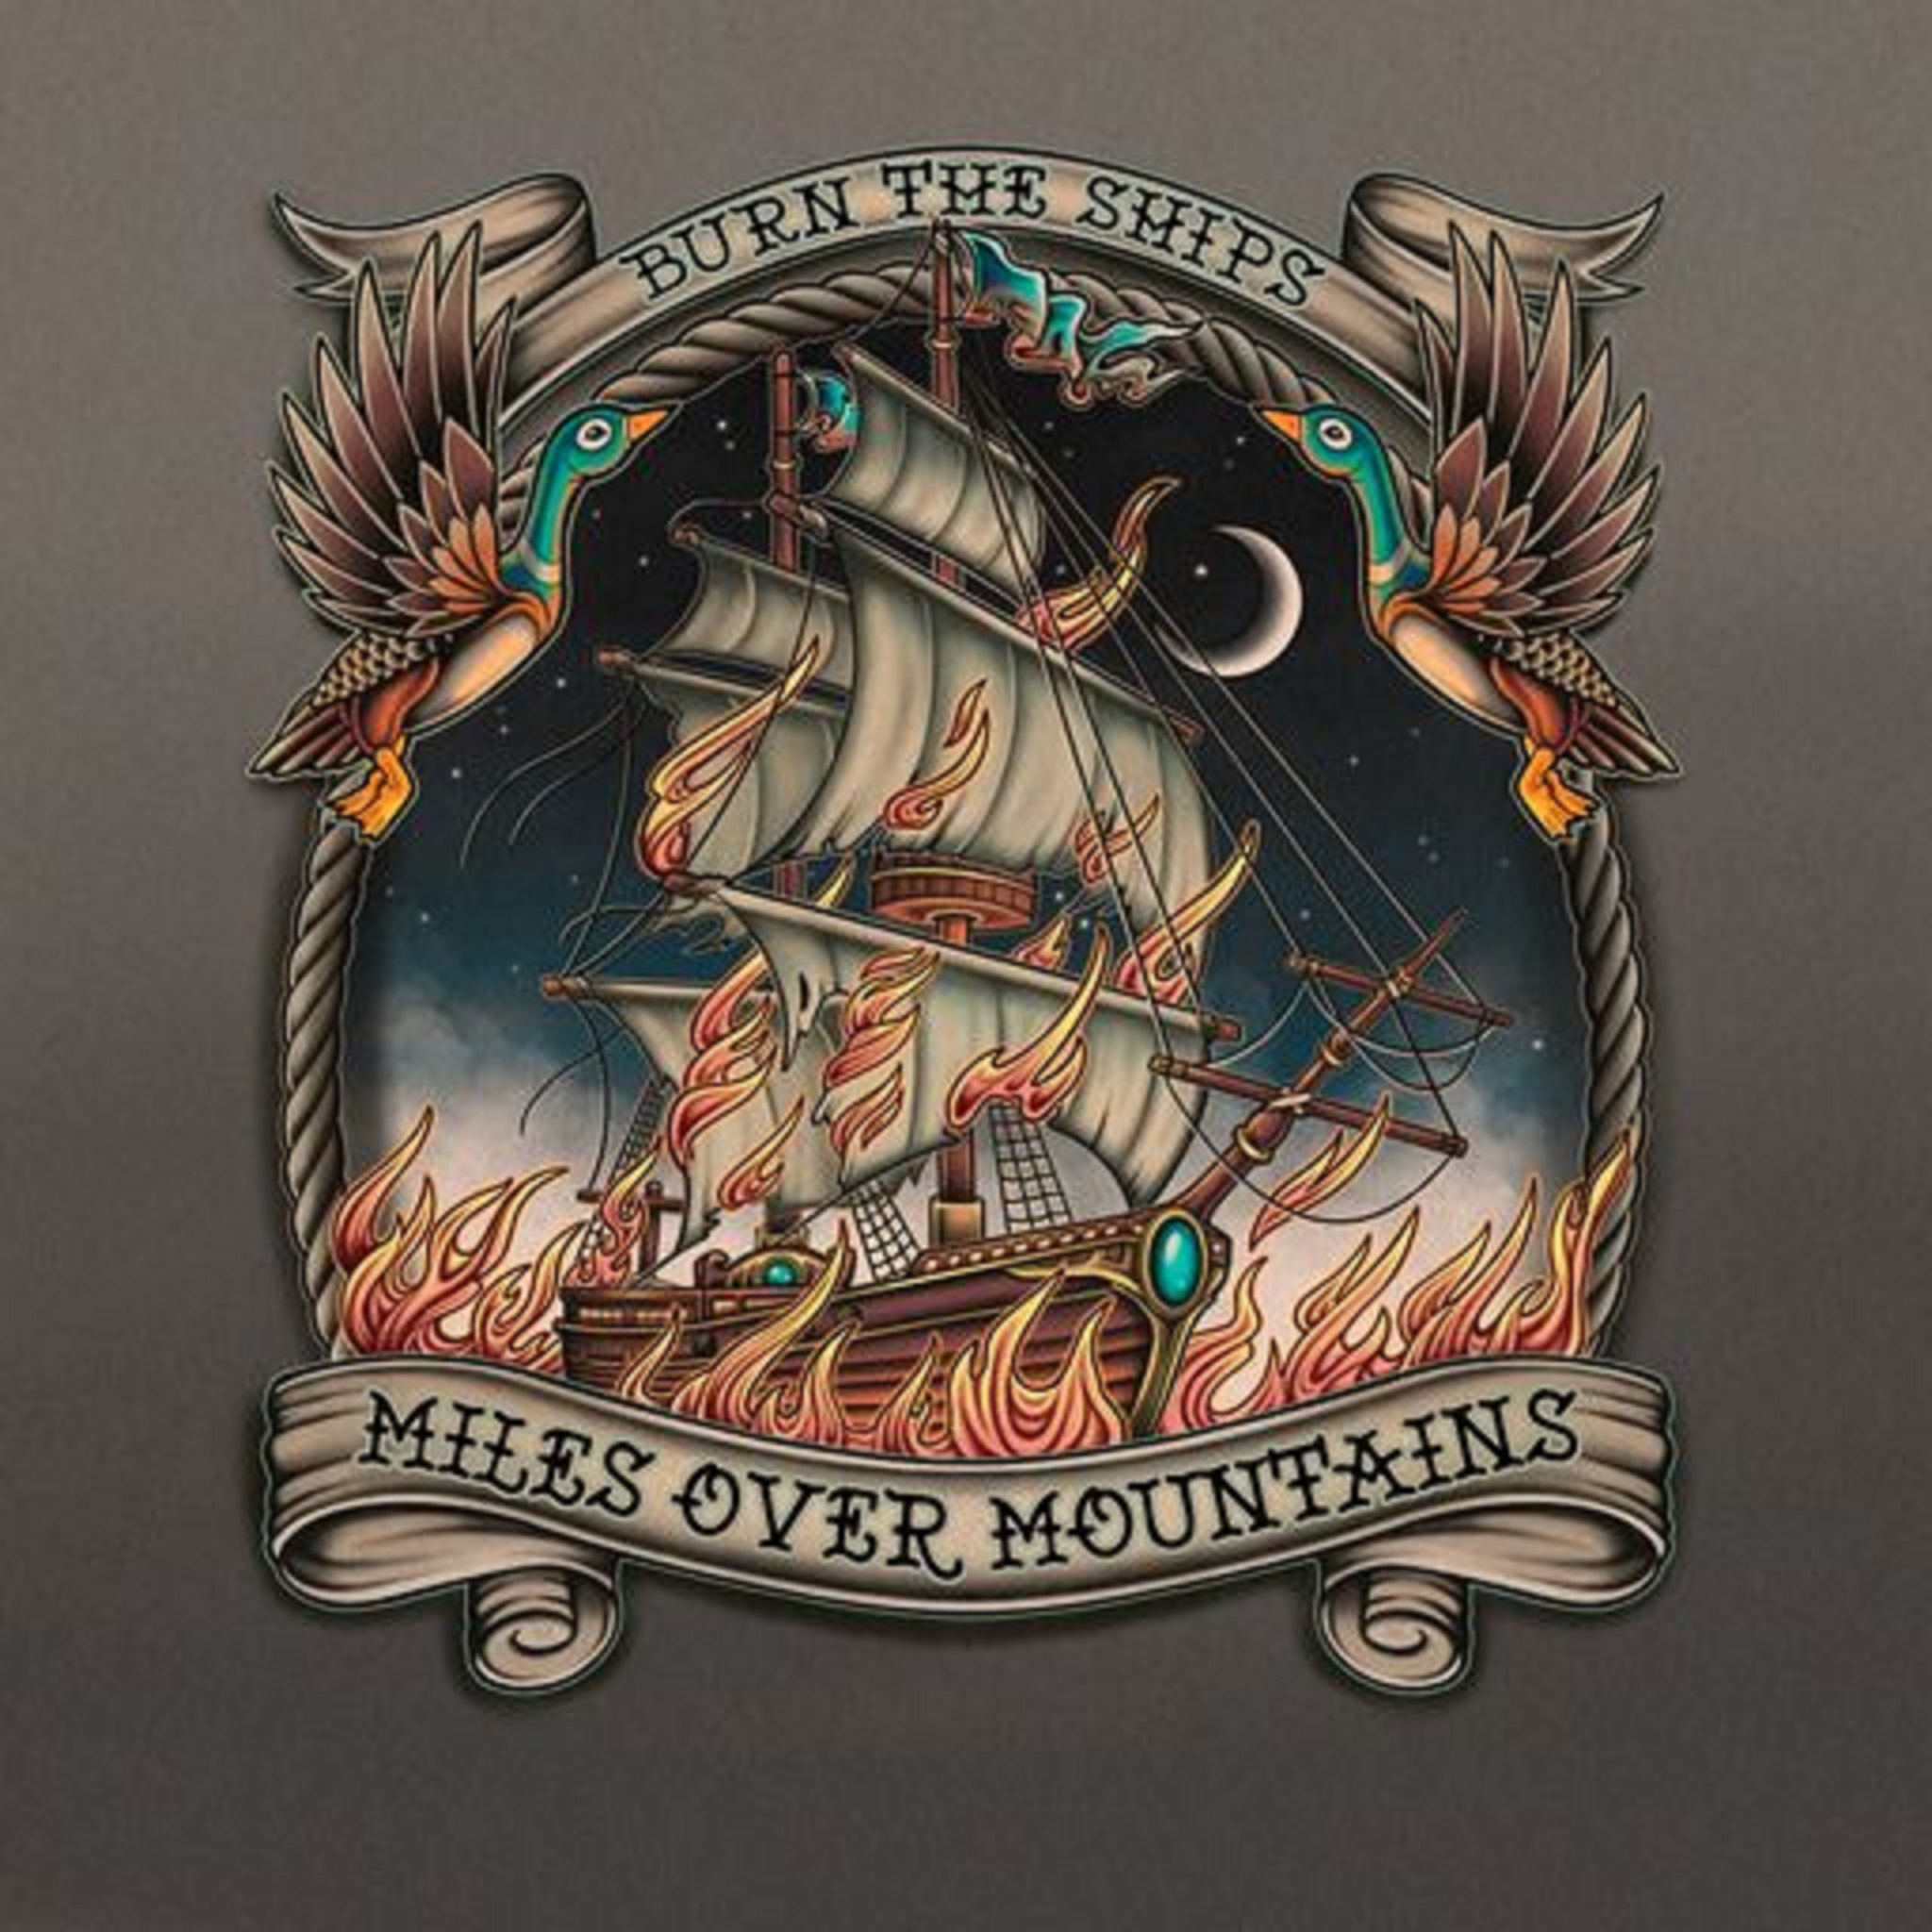 Miles Over Mountains Release New Album Burn the Ships